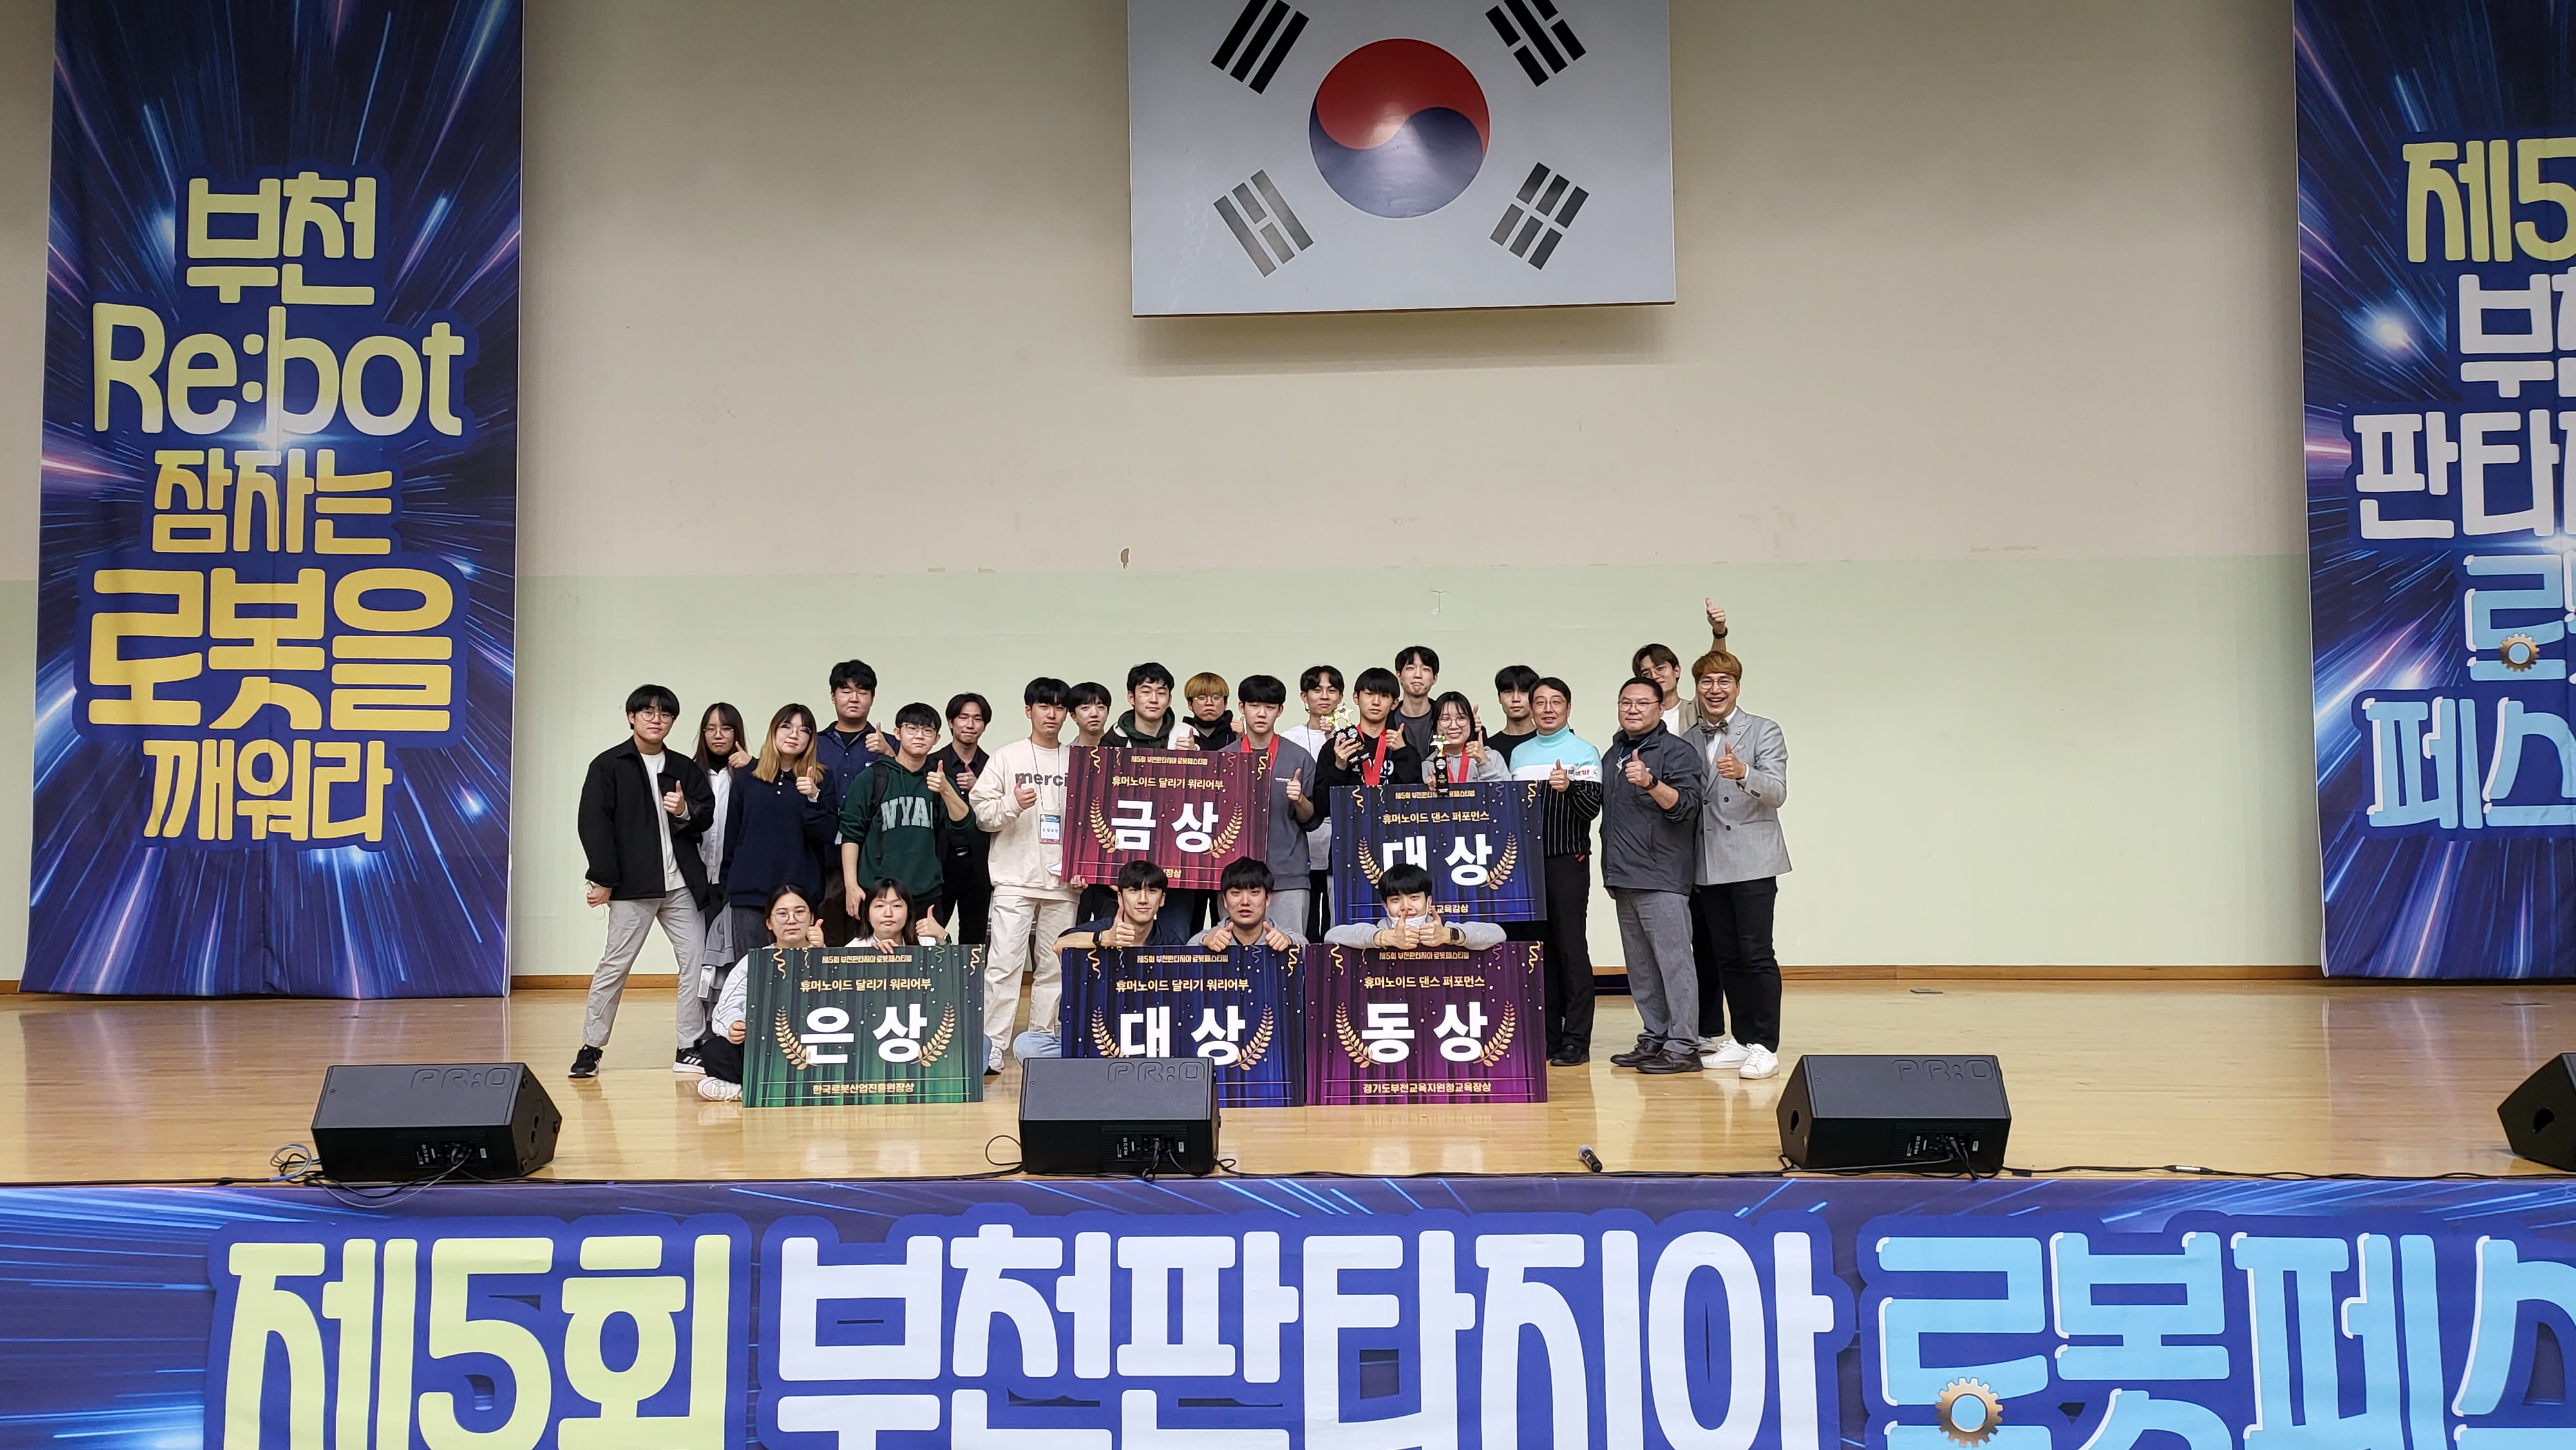 Department of Human Intelligence of Robot Engineering Swept the 5th Bucheon Fantasia Robot Competition